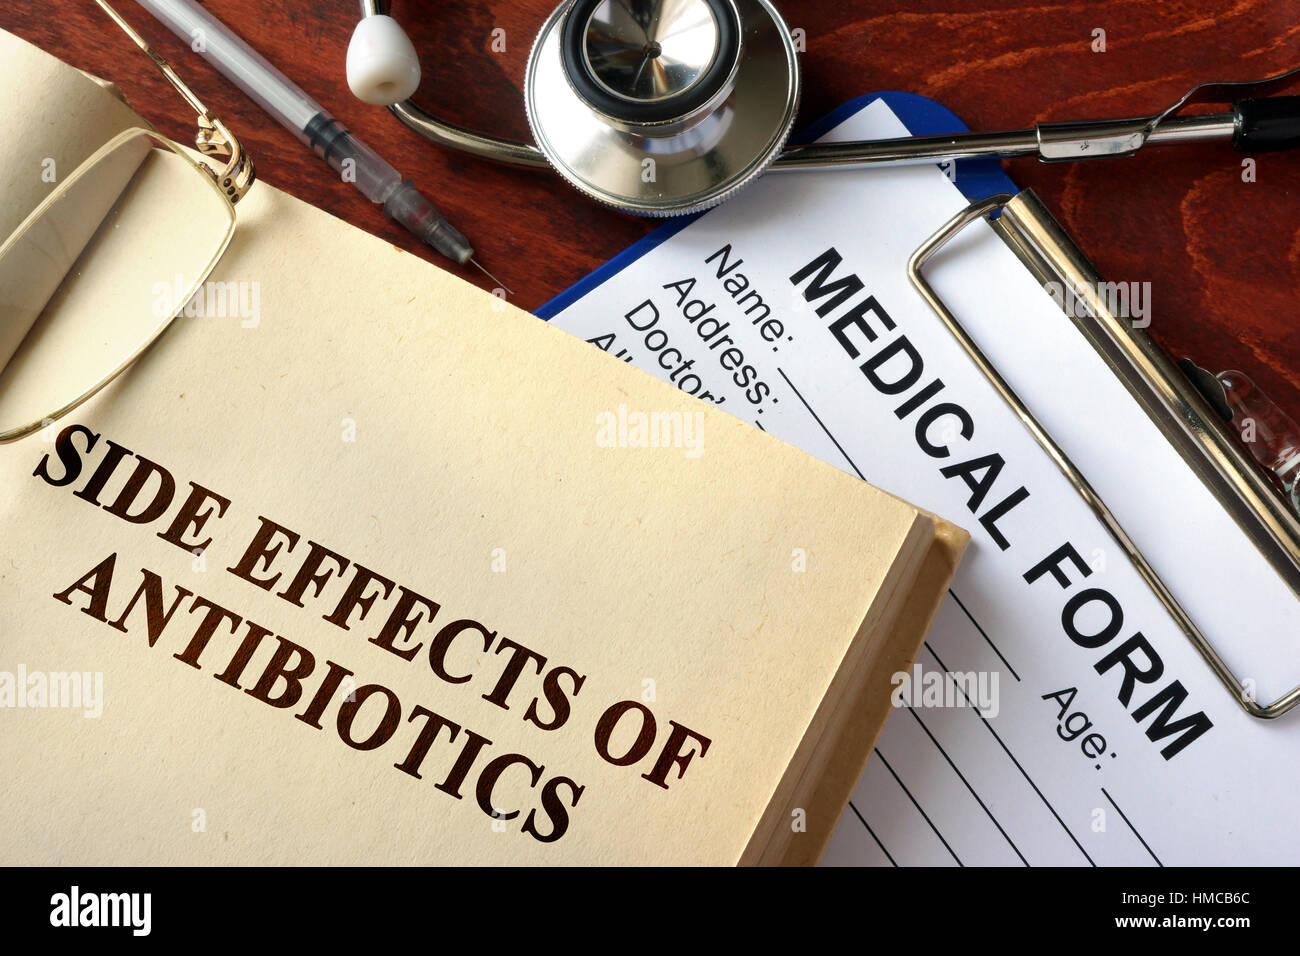 Title side effects of antibiotics on a book. Stock Photo